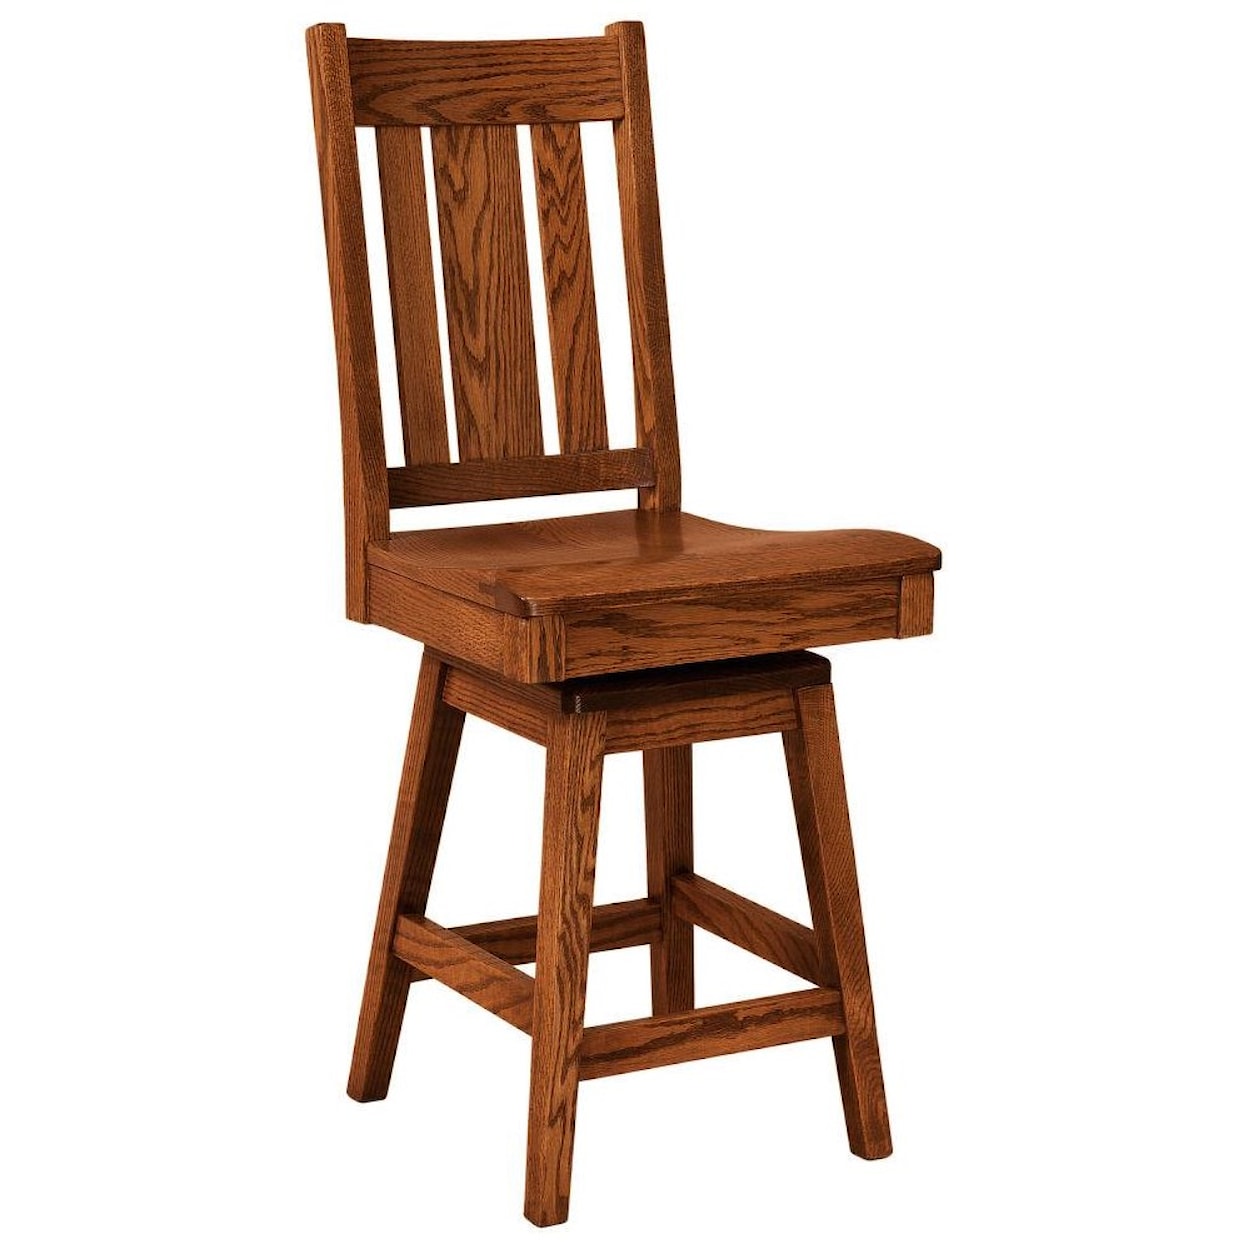 F&N Woodworking Jacoby 30" Swivel Stool